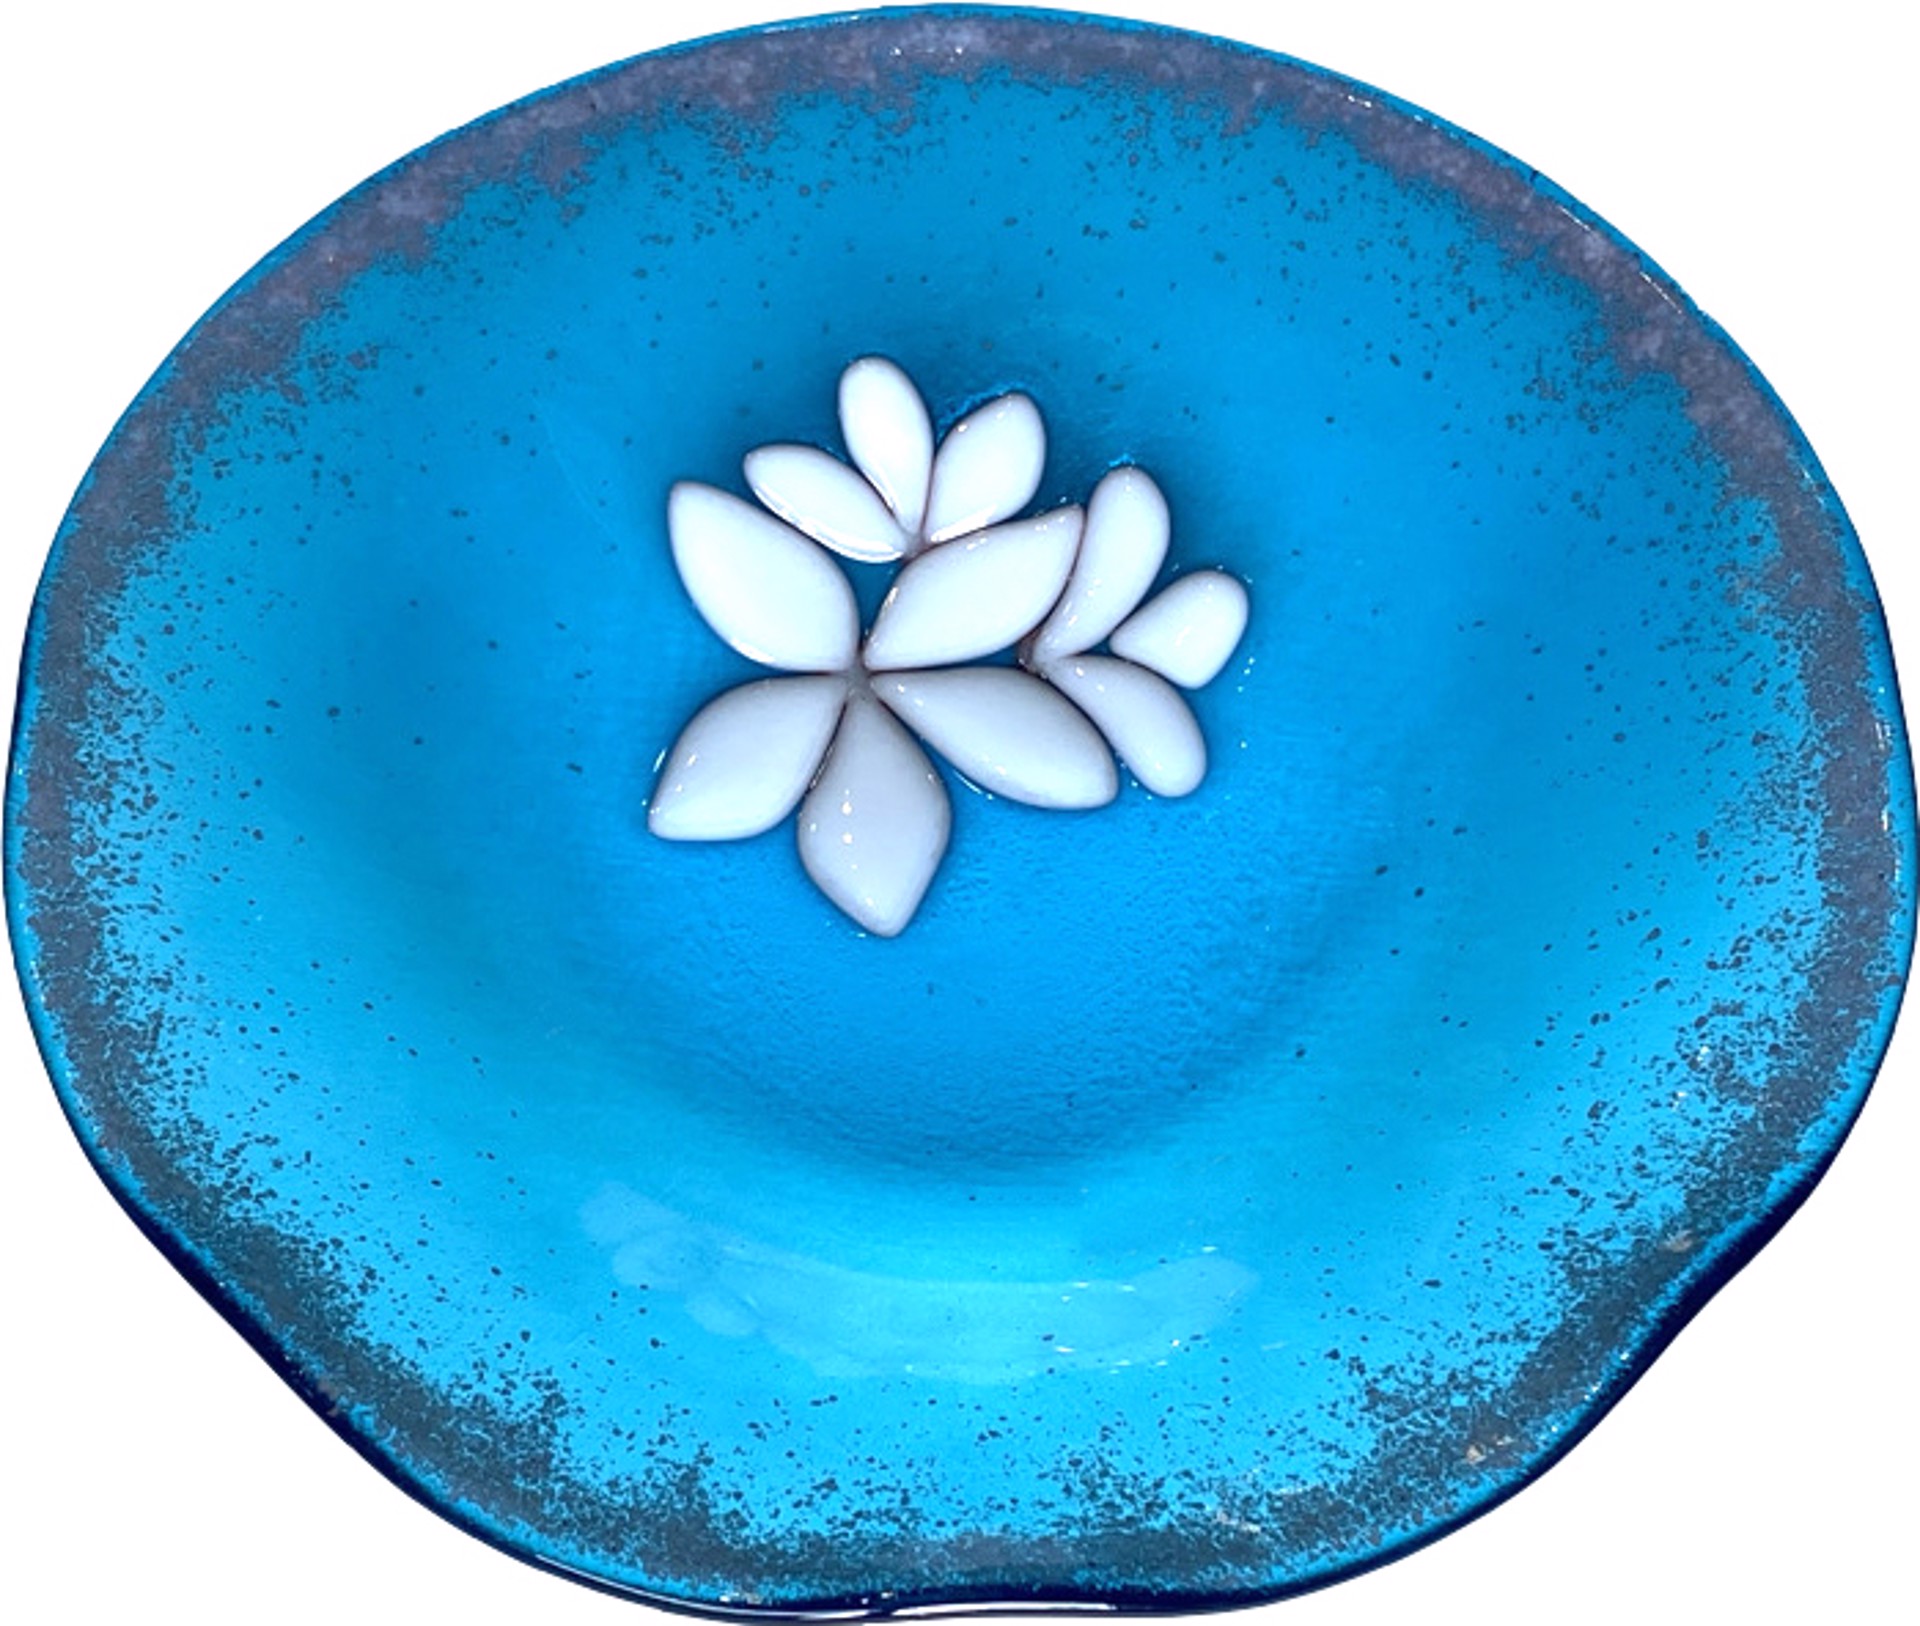 Blue and White Plumeria Plate by Jennifer Welch